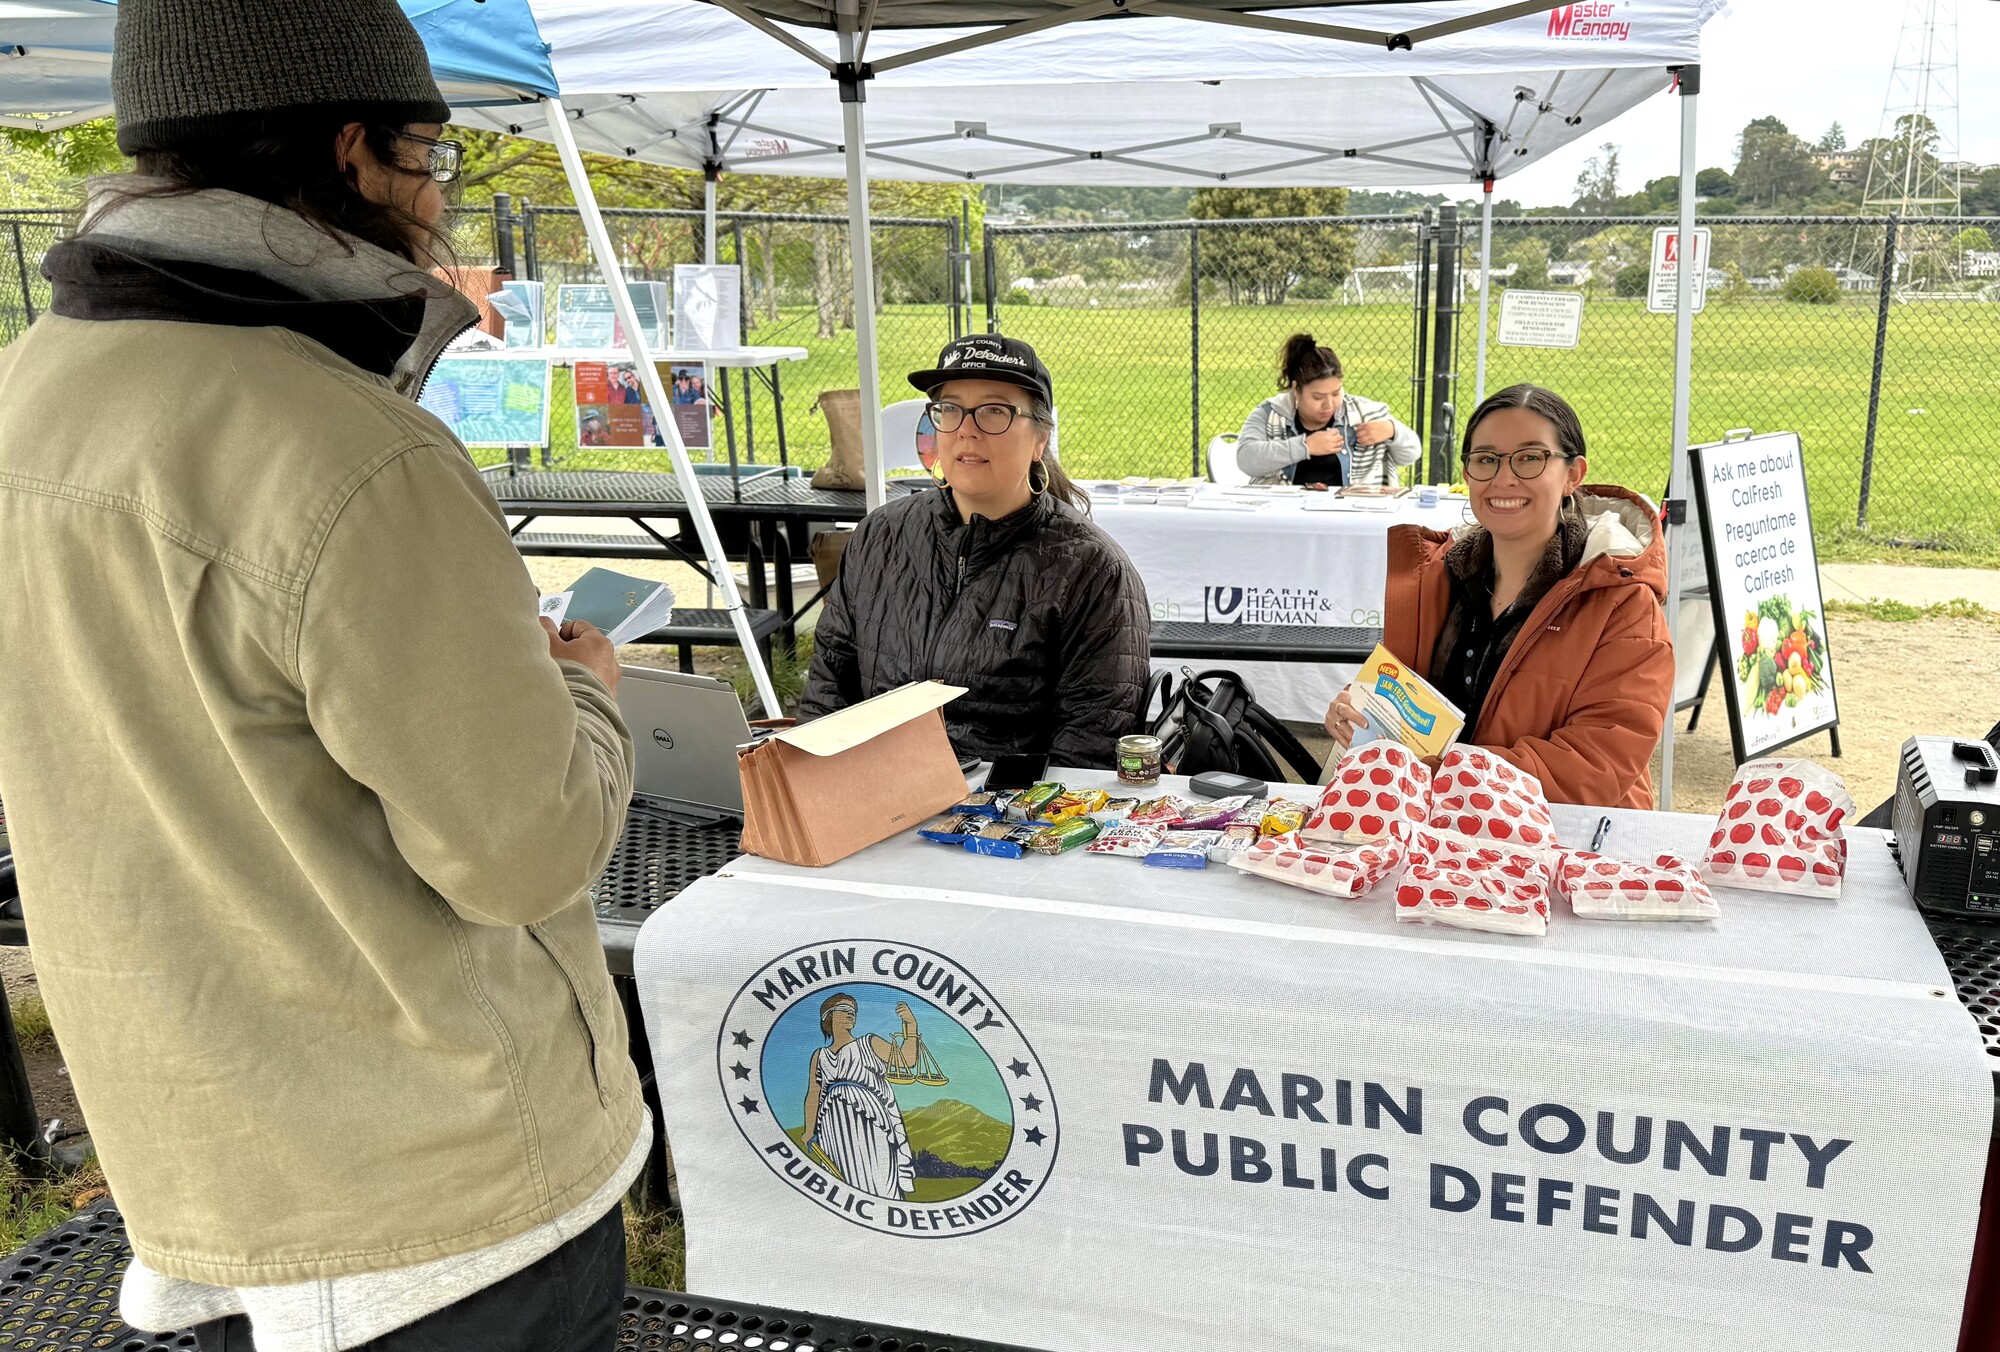 Two women sit at a table and represent the Public Defender's Office during a Clean Slate program event.